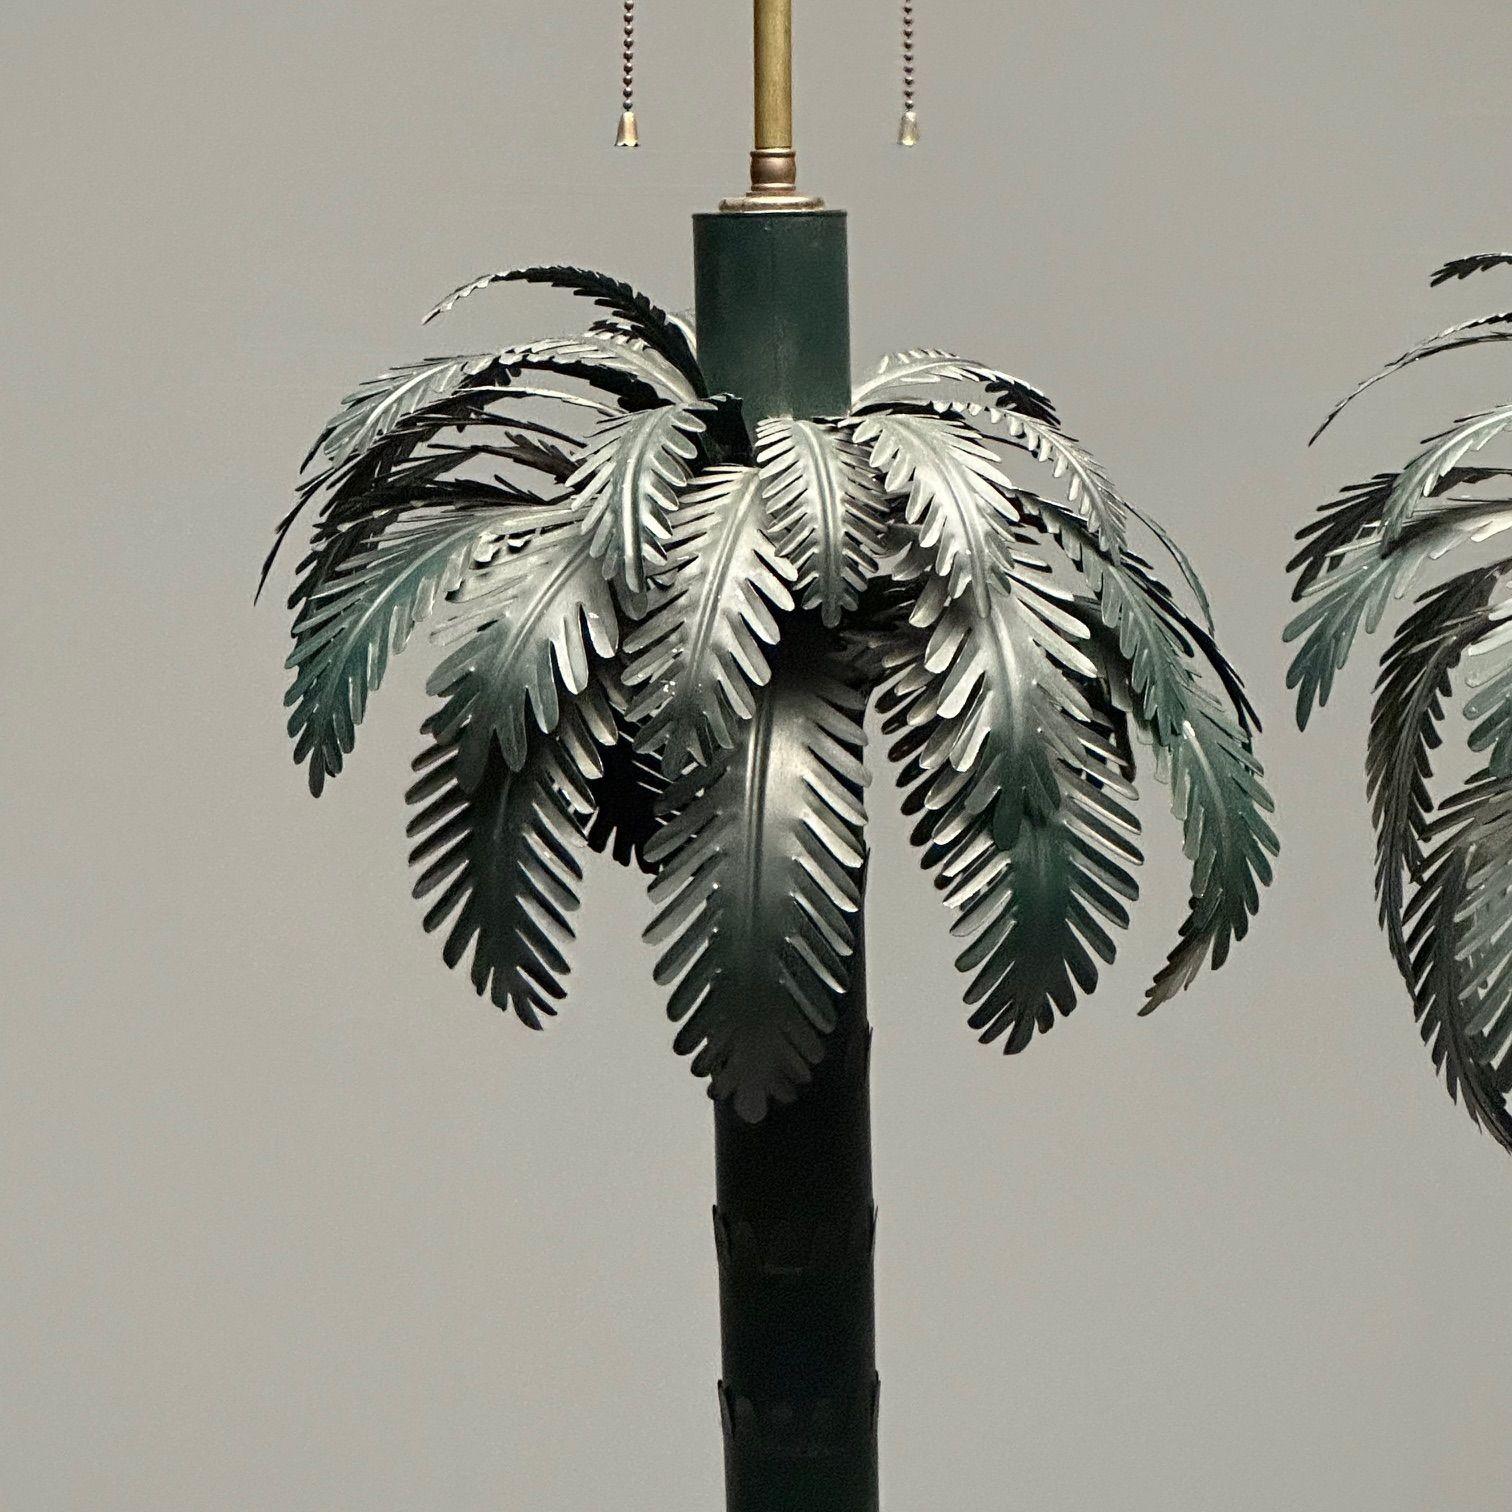 Maison Jansen Style, Mid-Century Modern, Palm Tree Lamps, Green, Metal, 1970s For Sale 10